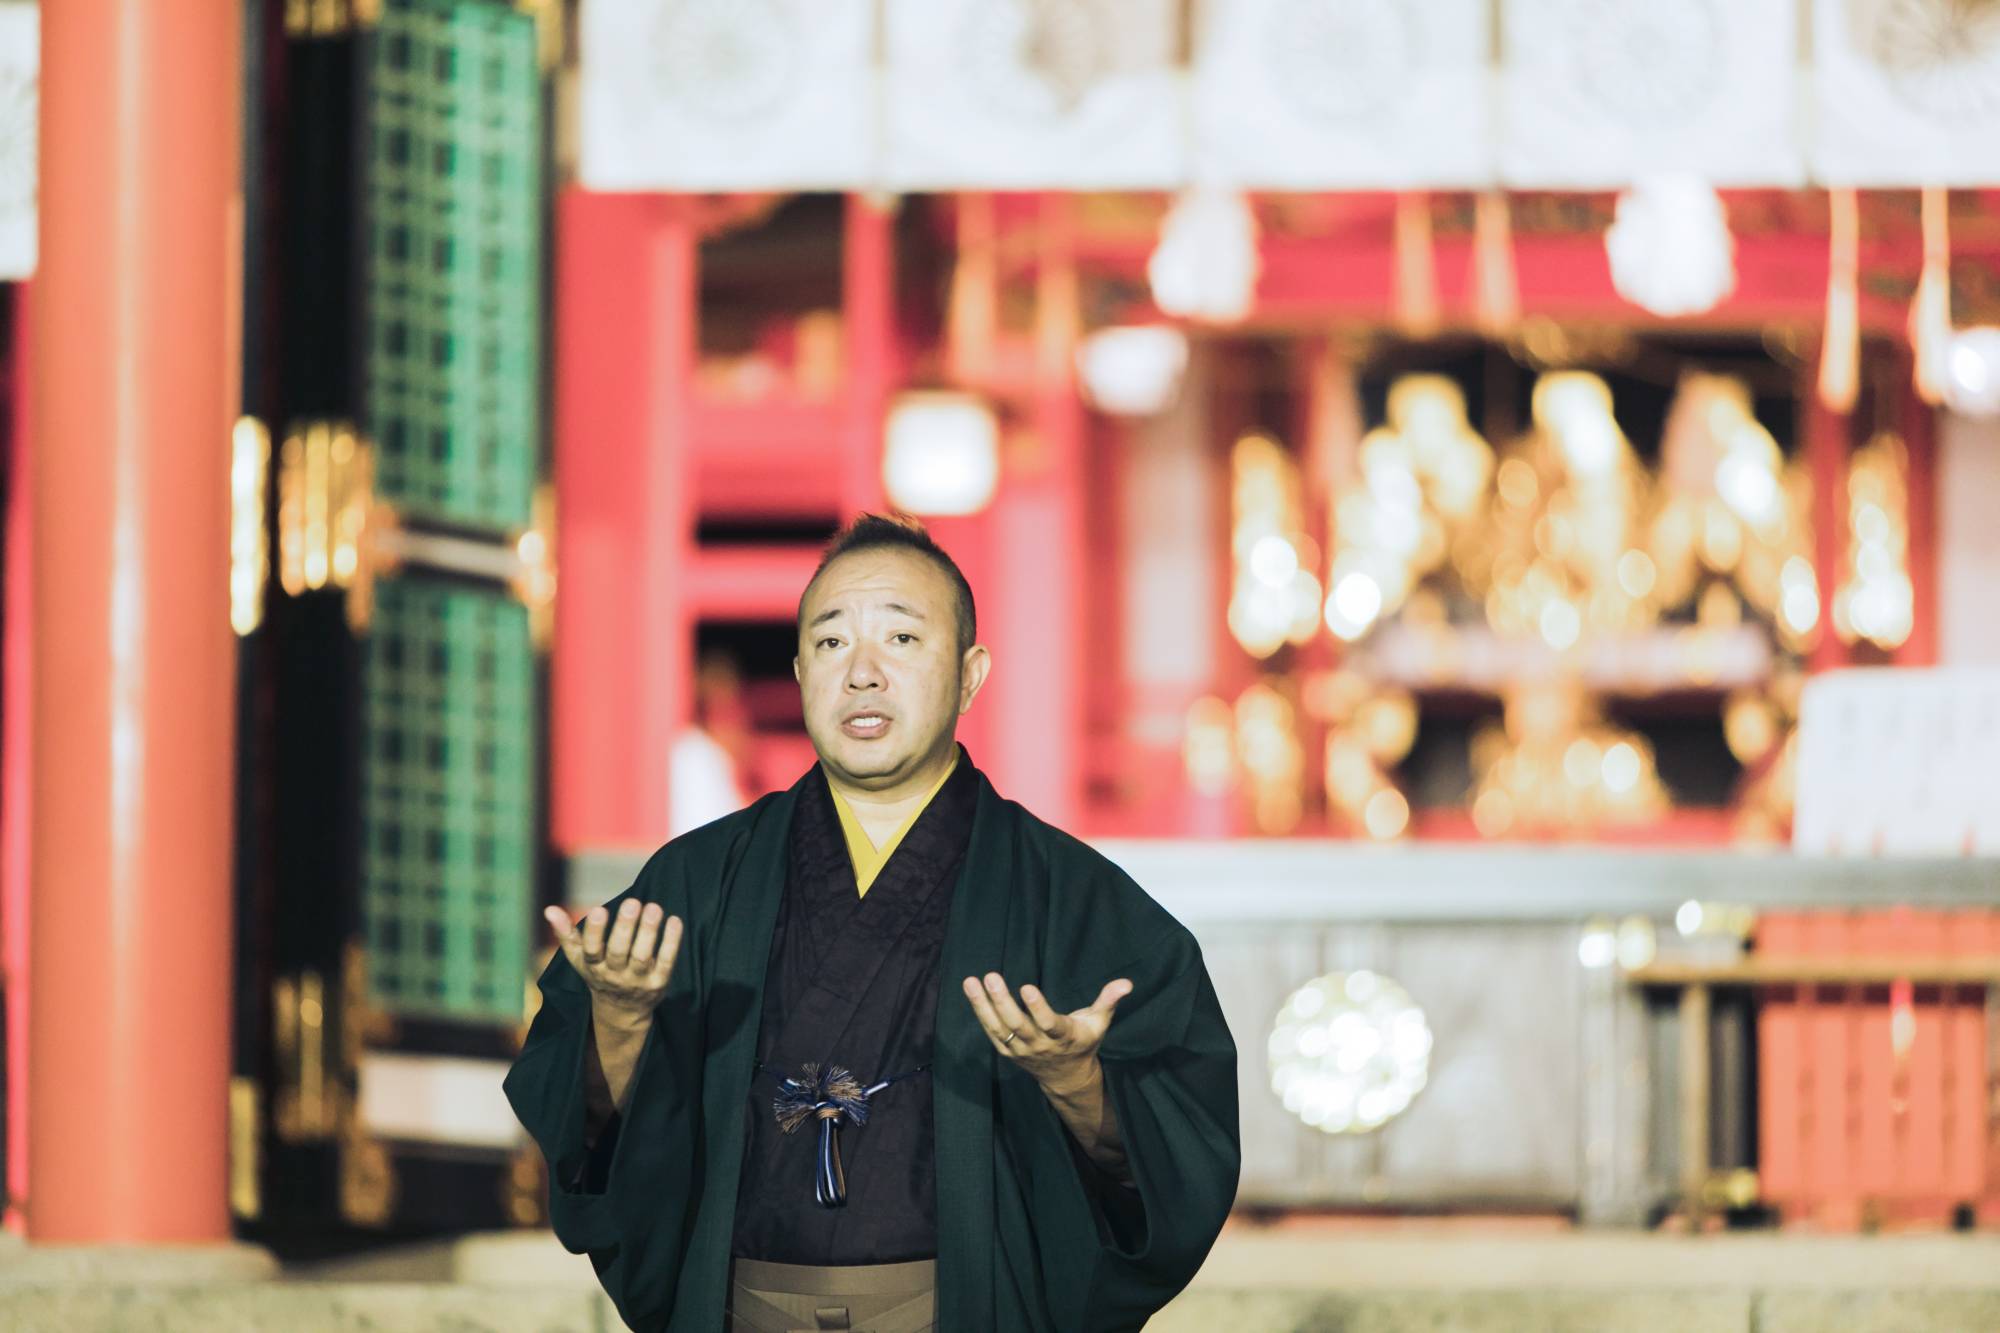 Ho-Me-I-Ku Foundation leader Kunio Hara delivers an online speech from Ikuta Shrine in Kobe for the TEDxKharghar event in India in January 2022. | SPIRAL UP CO.